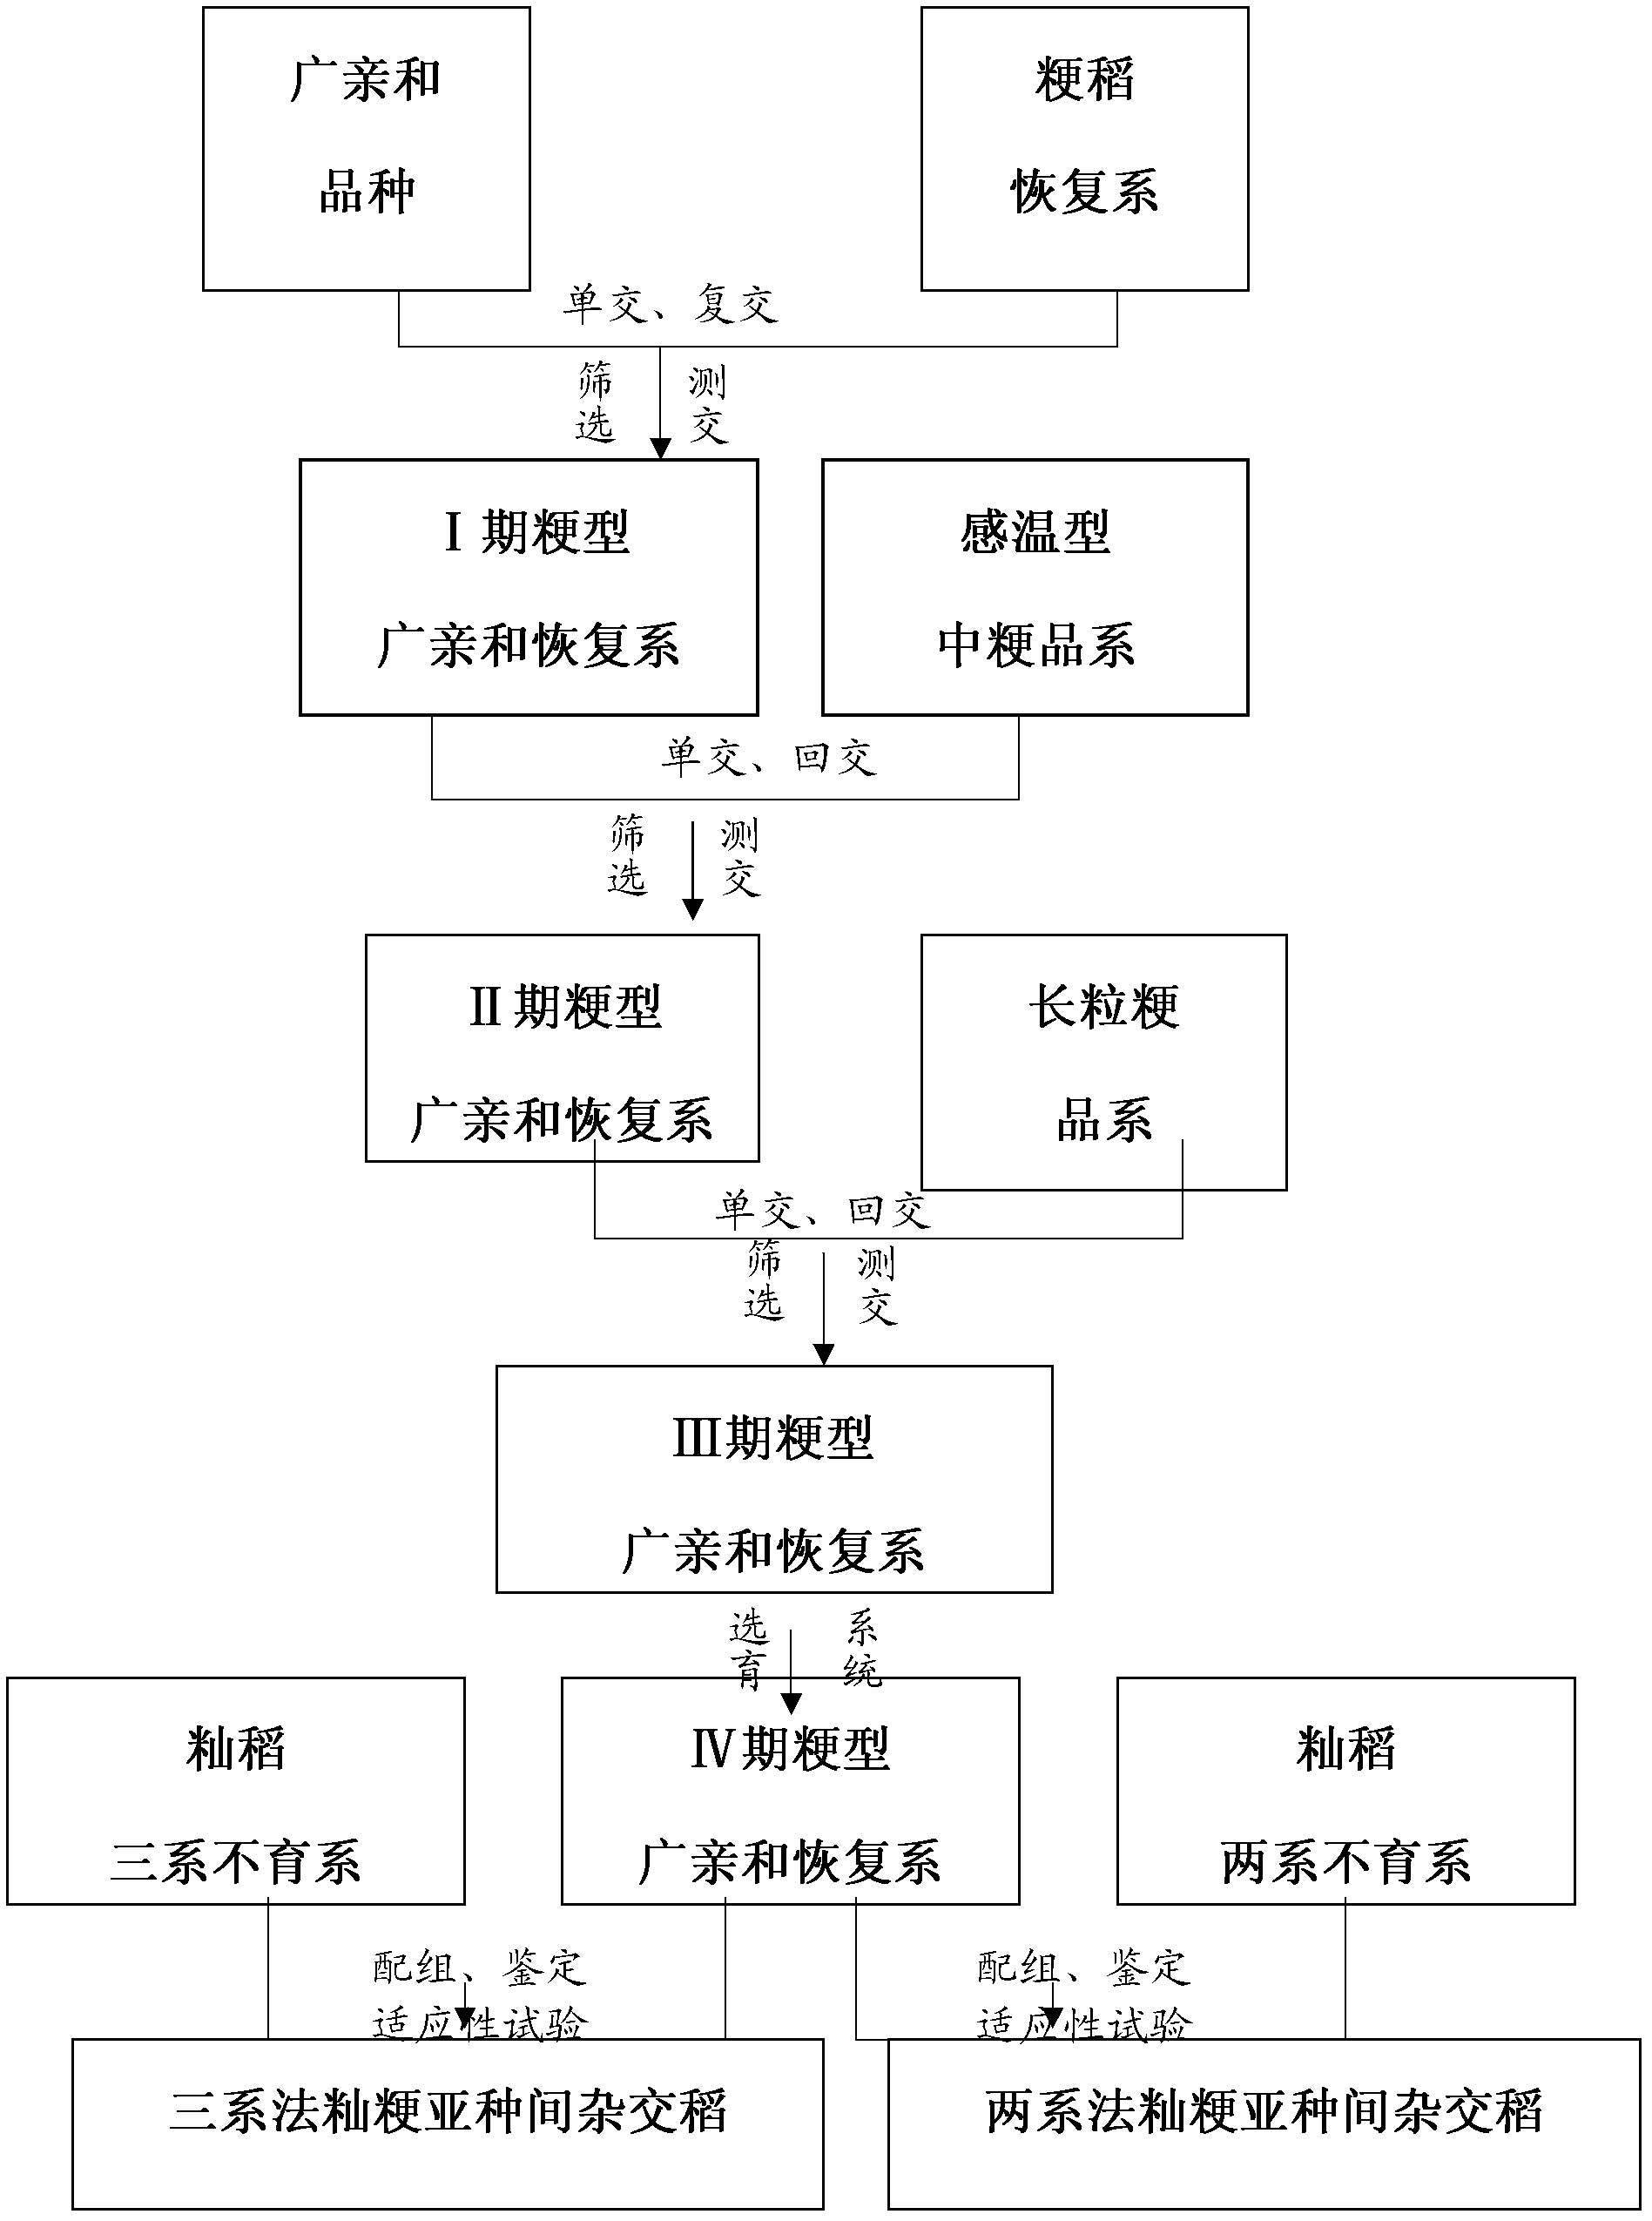 Method for breeding indica sterile line-japonica restorer line intersubspecific hybrid rice and application of method